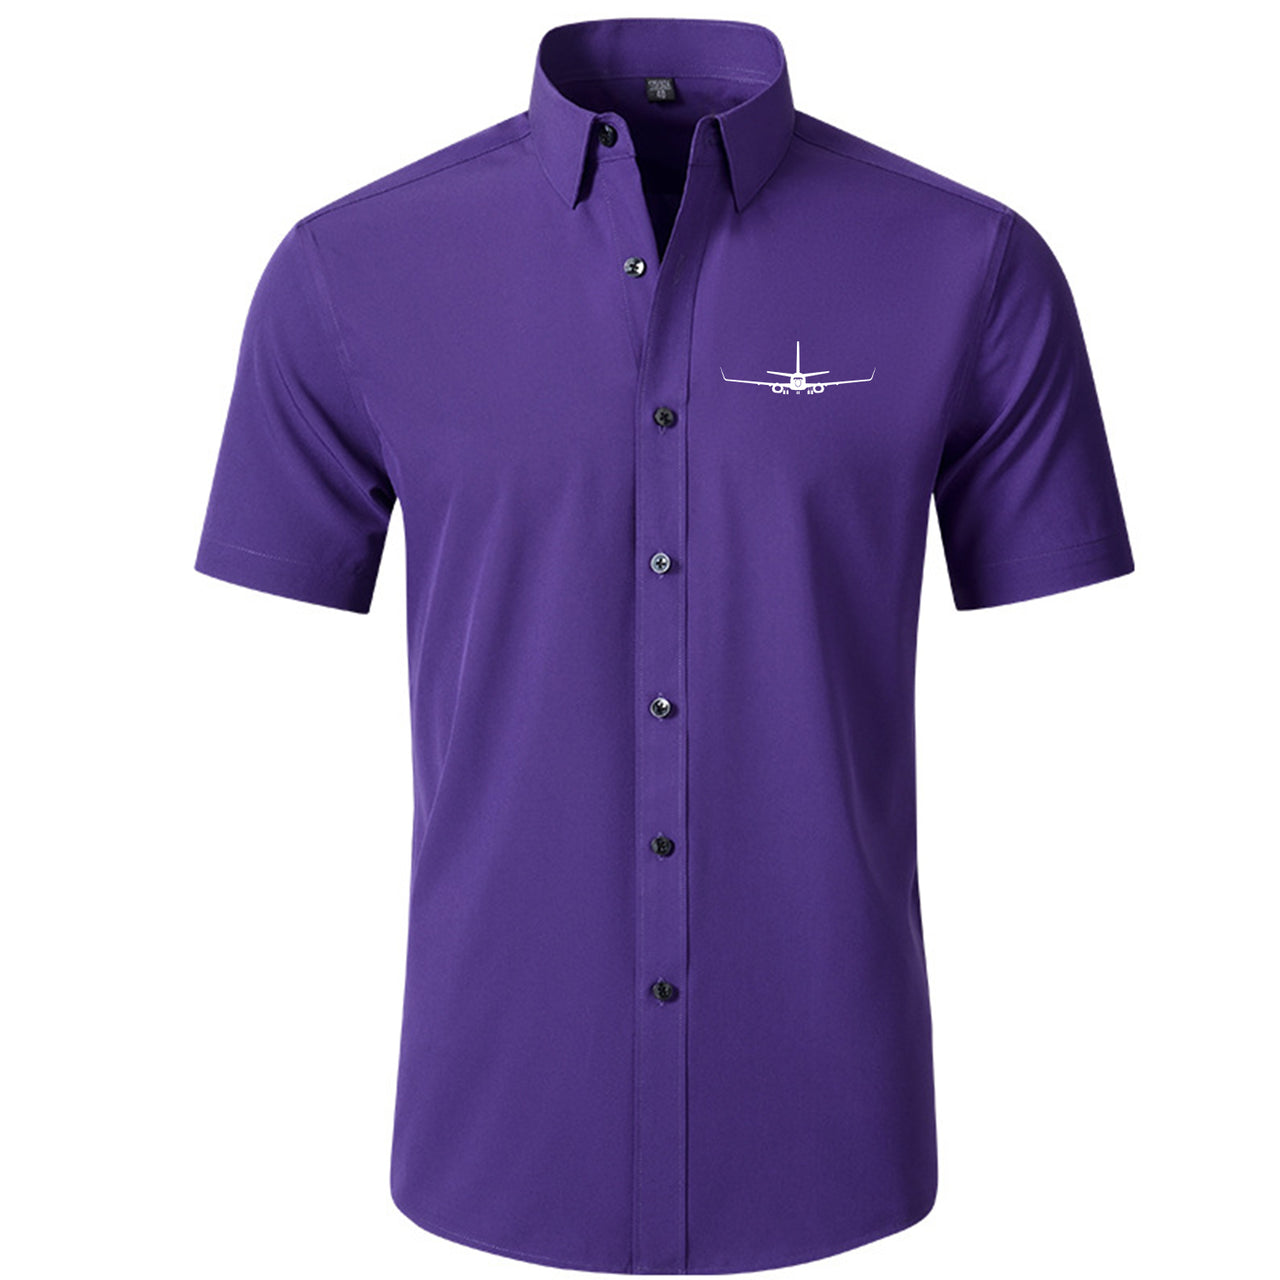 Boeing 737-800NG Silhouette Designed Short Sleeve Shirts